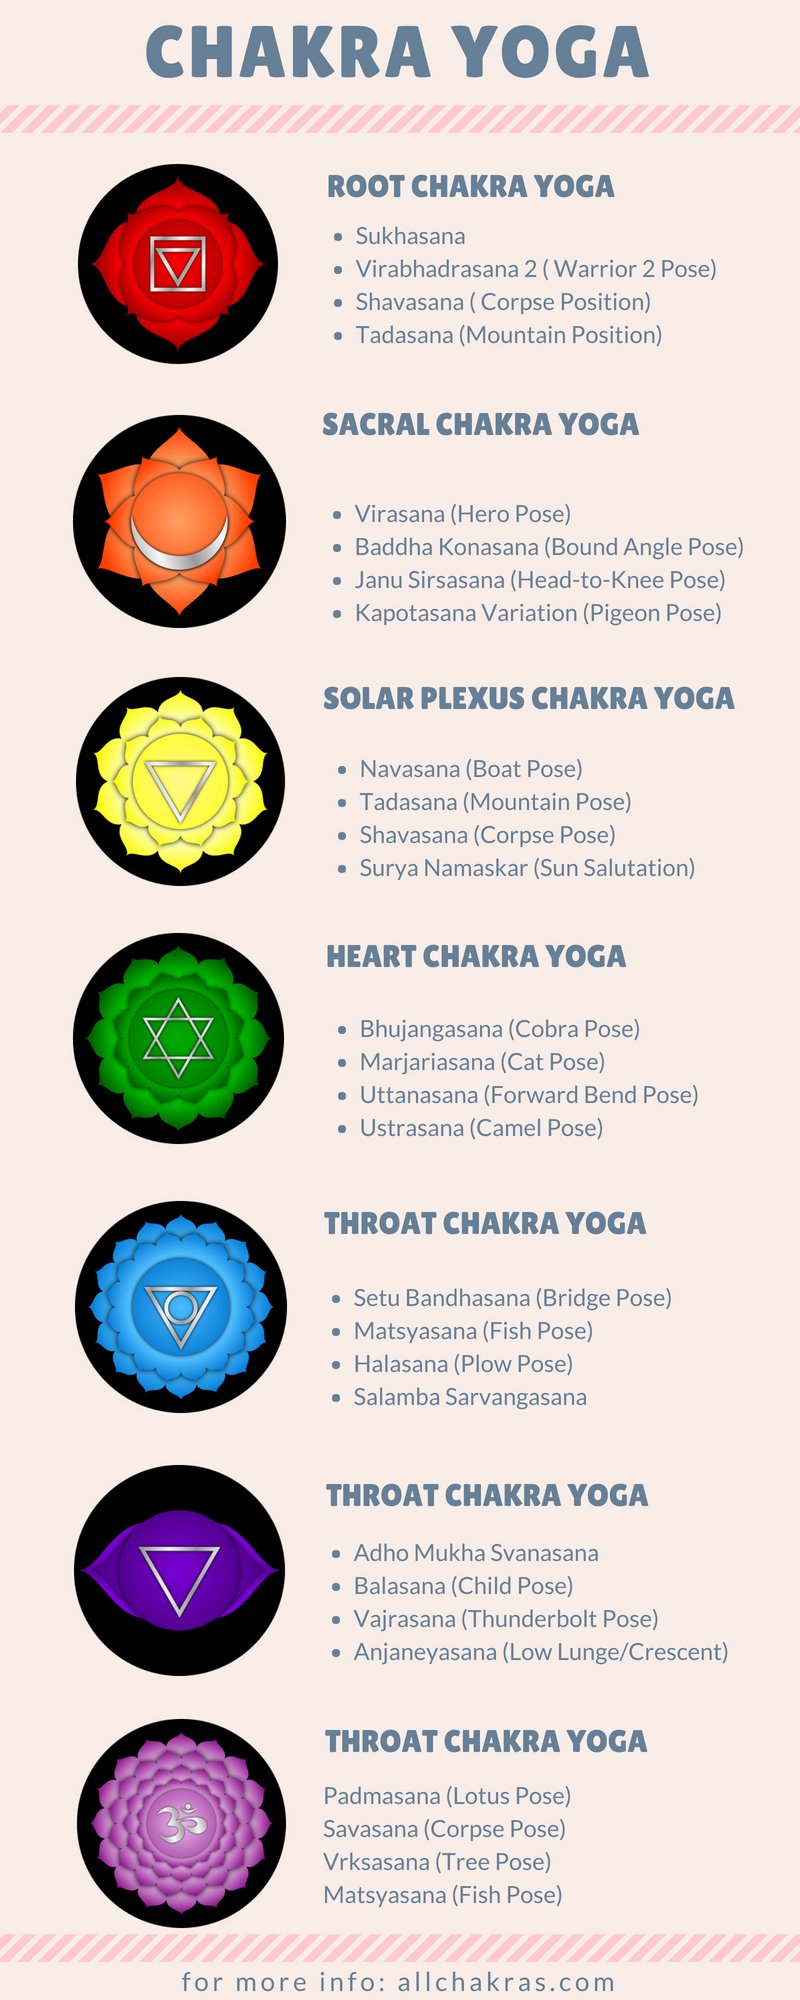 All Chakras on X: #Yoga asana is work really fine with lower